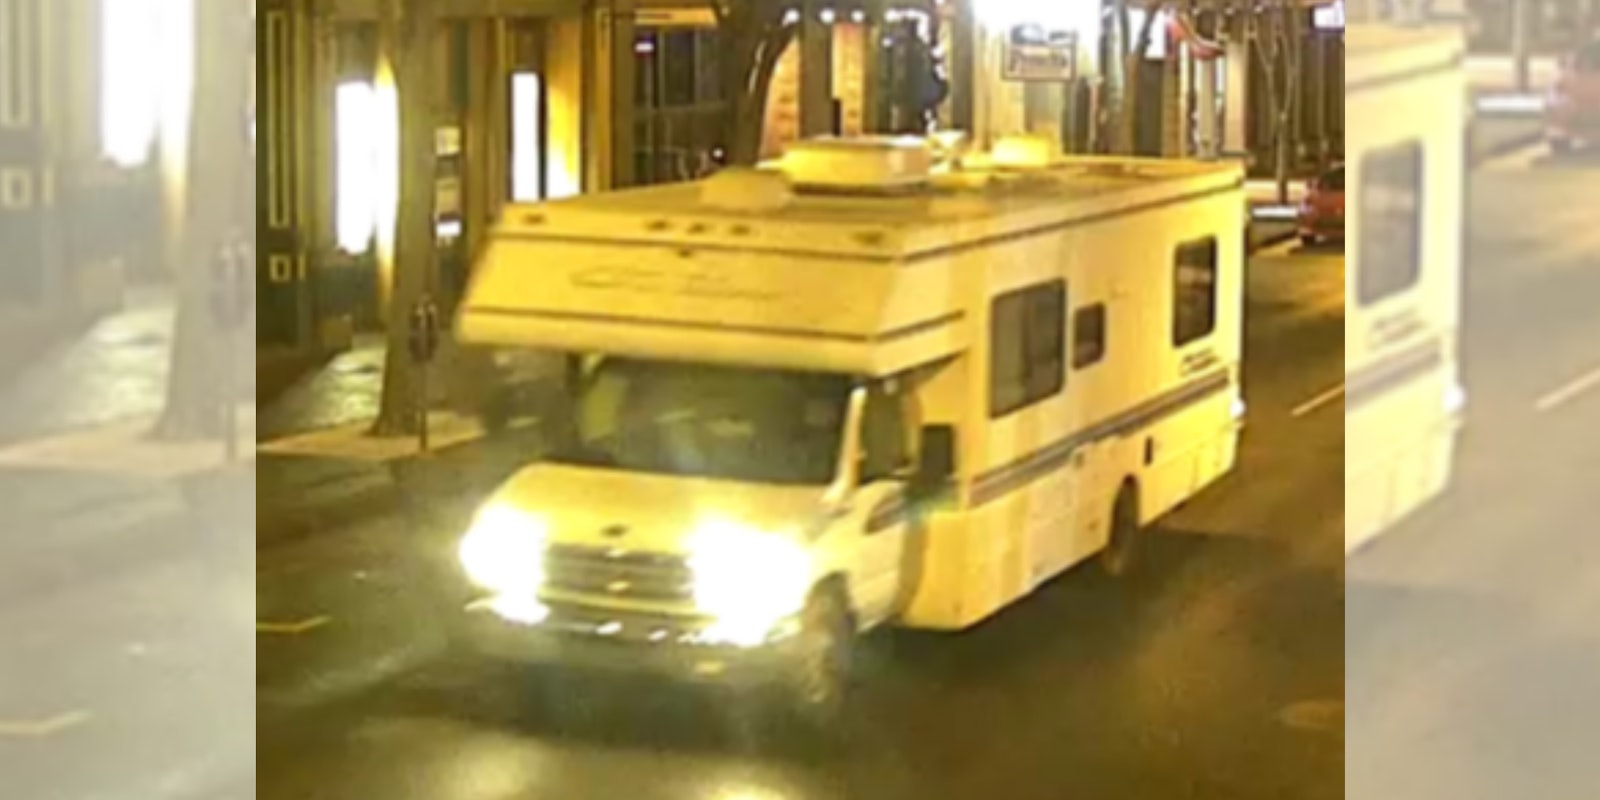 An RV used by the suspected Nashville bomber. Investigators are looking into whether the man who detonated a bomb inside an RV in Nashville, Tennessee on Christmas morning had a 'paranoia over 5G' technology, according to reports.